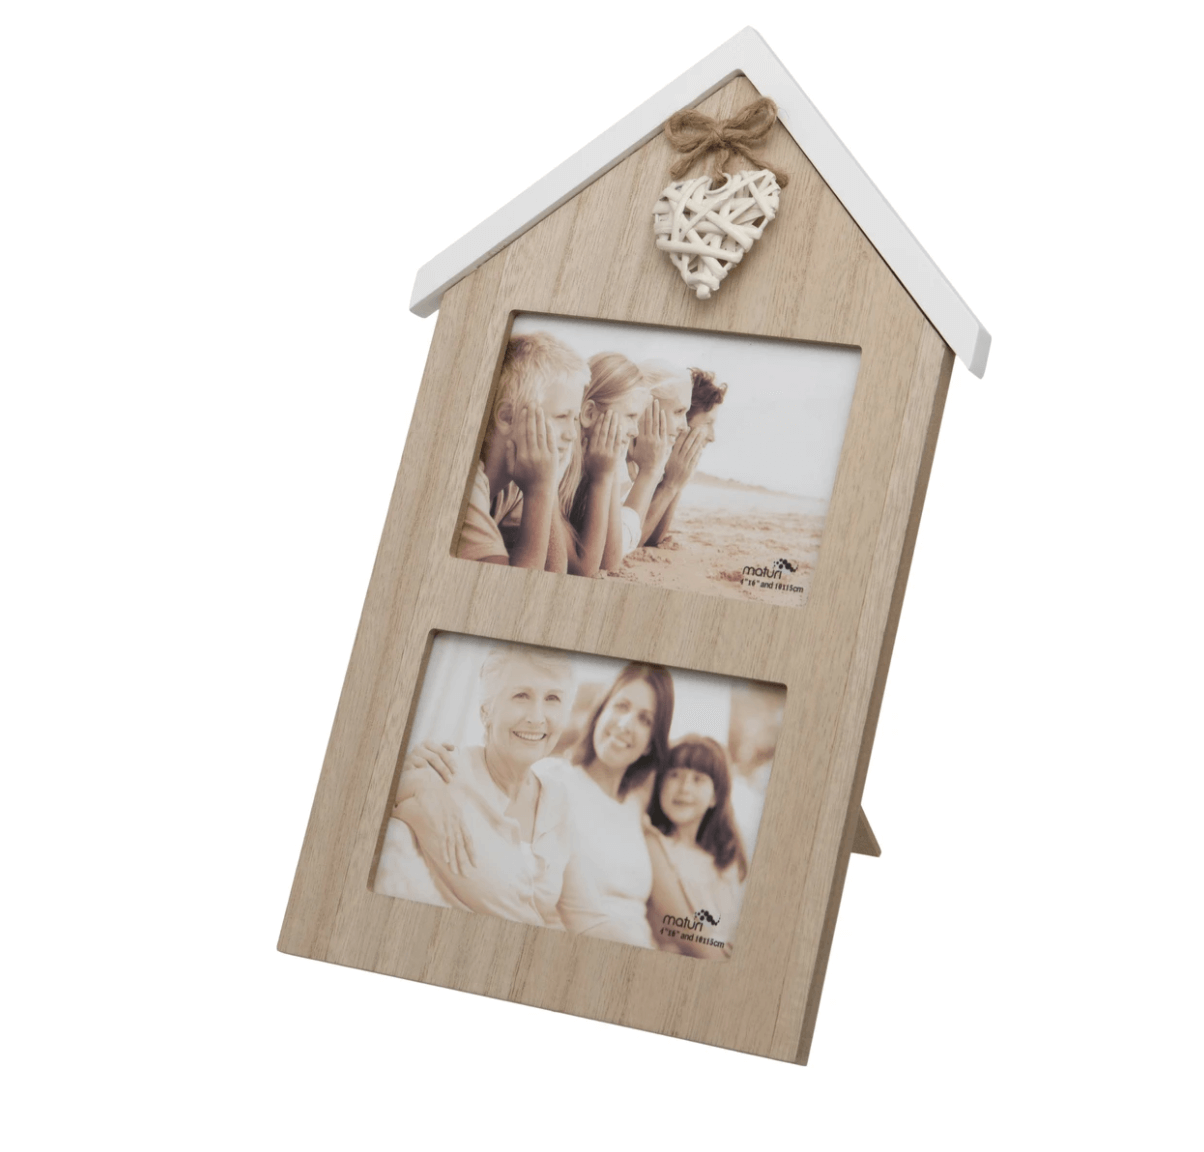 Woven Heart Wooden Double Photo Frame - Outlet - Save 20%